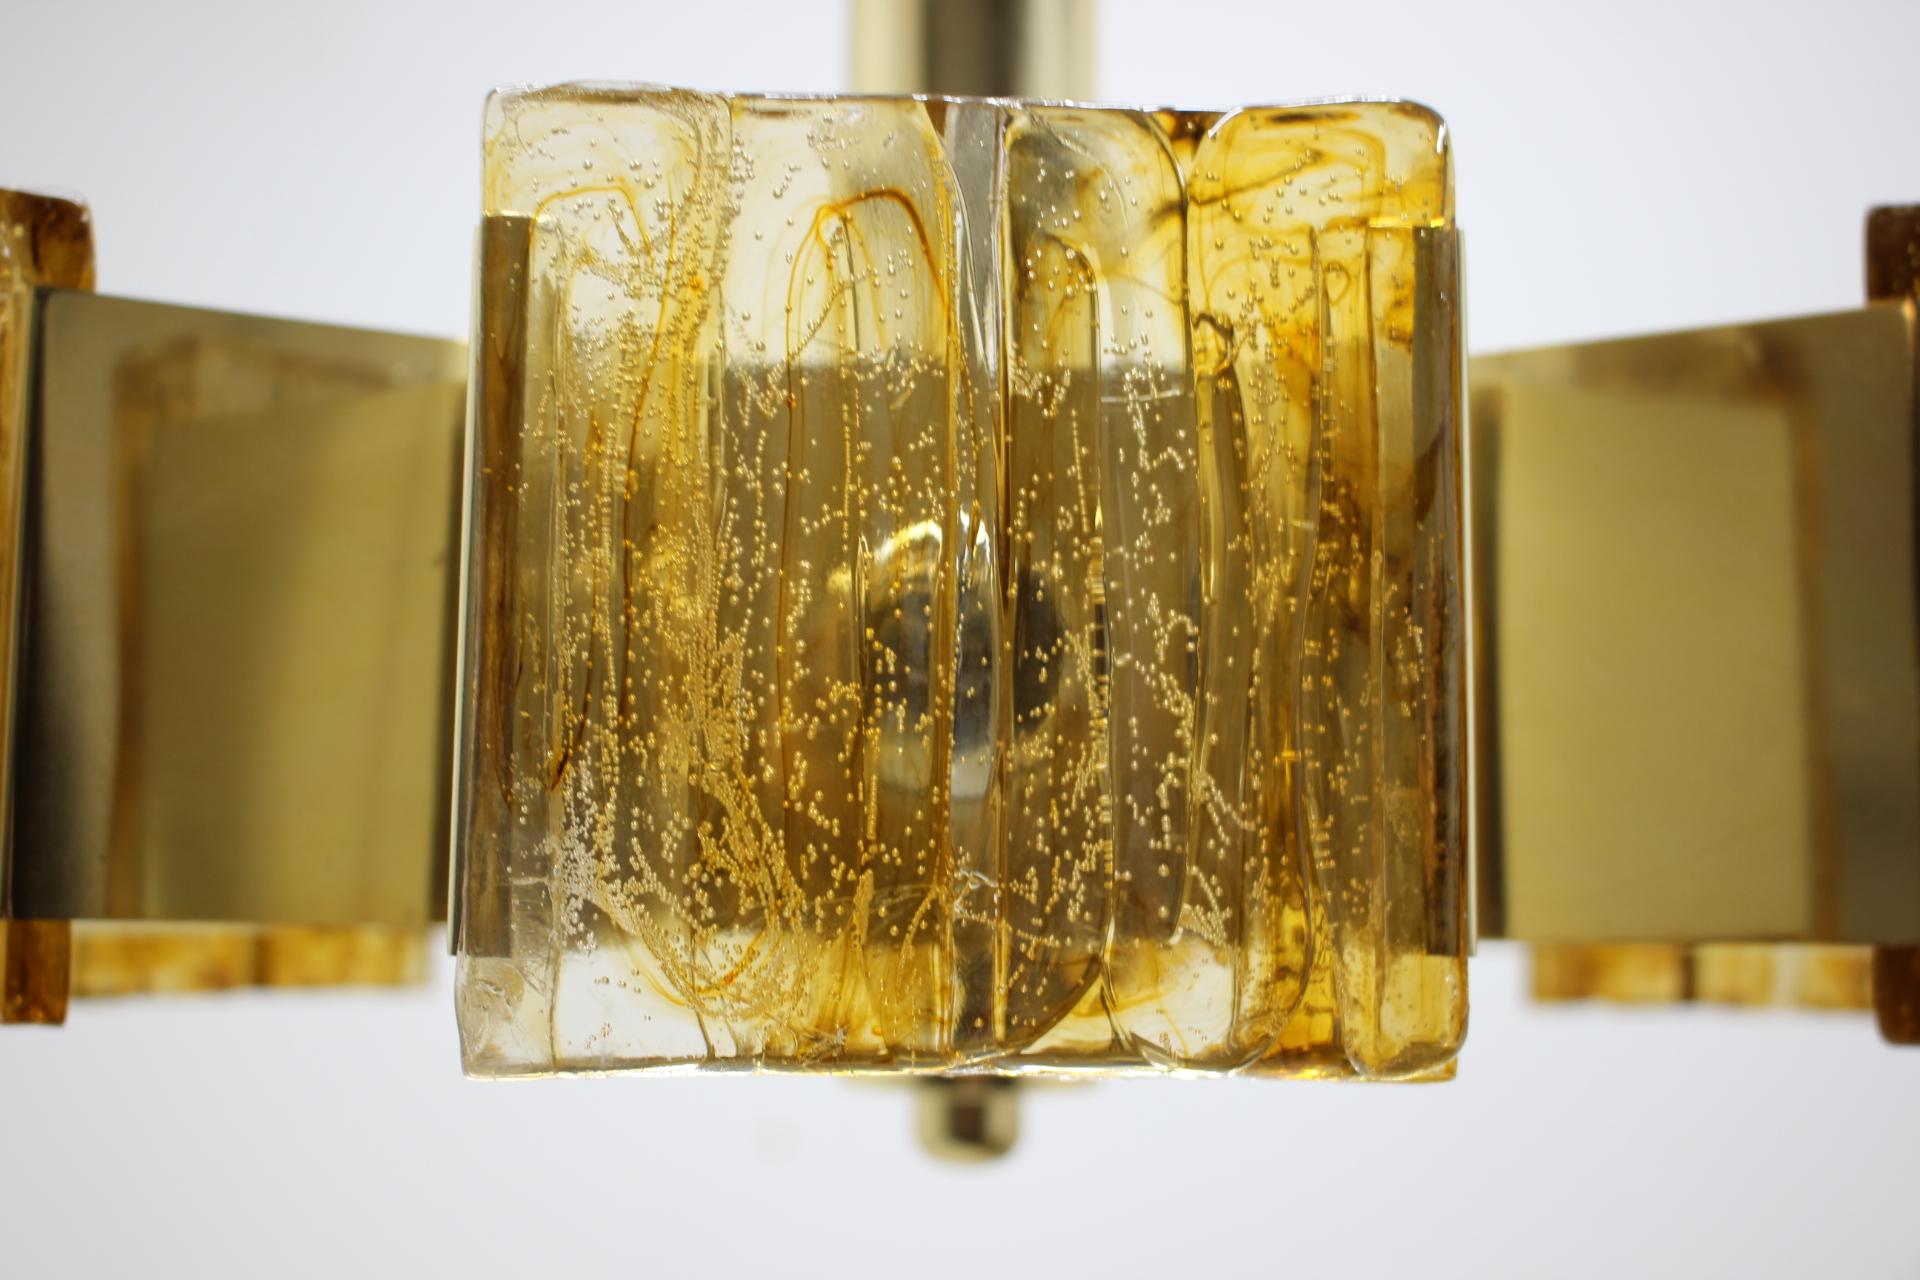 Late 20th Century Mid-Century Design Brass and Resin Pendant, 1970s / Hungary For Sale